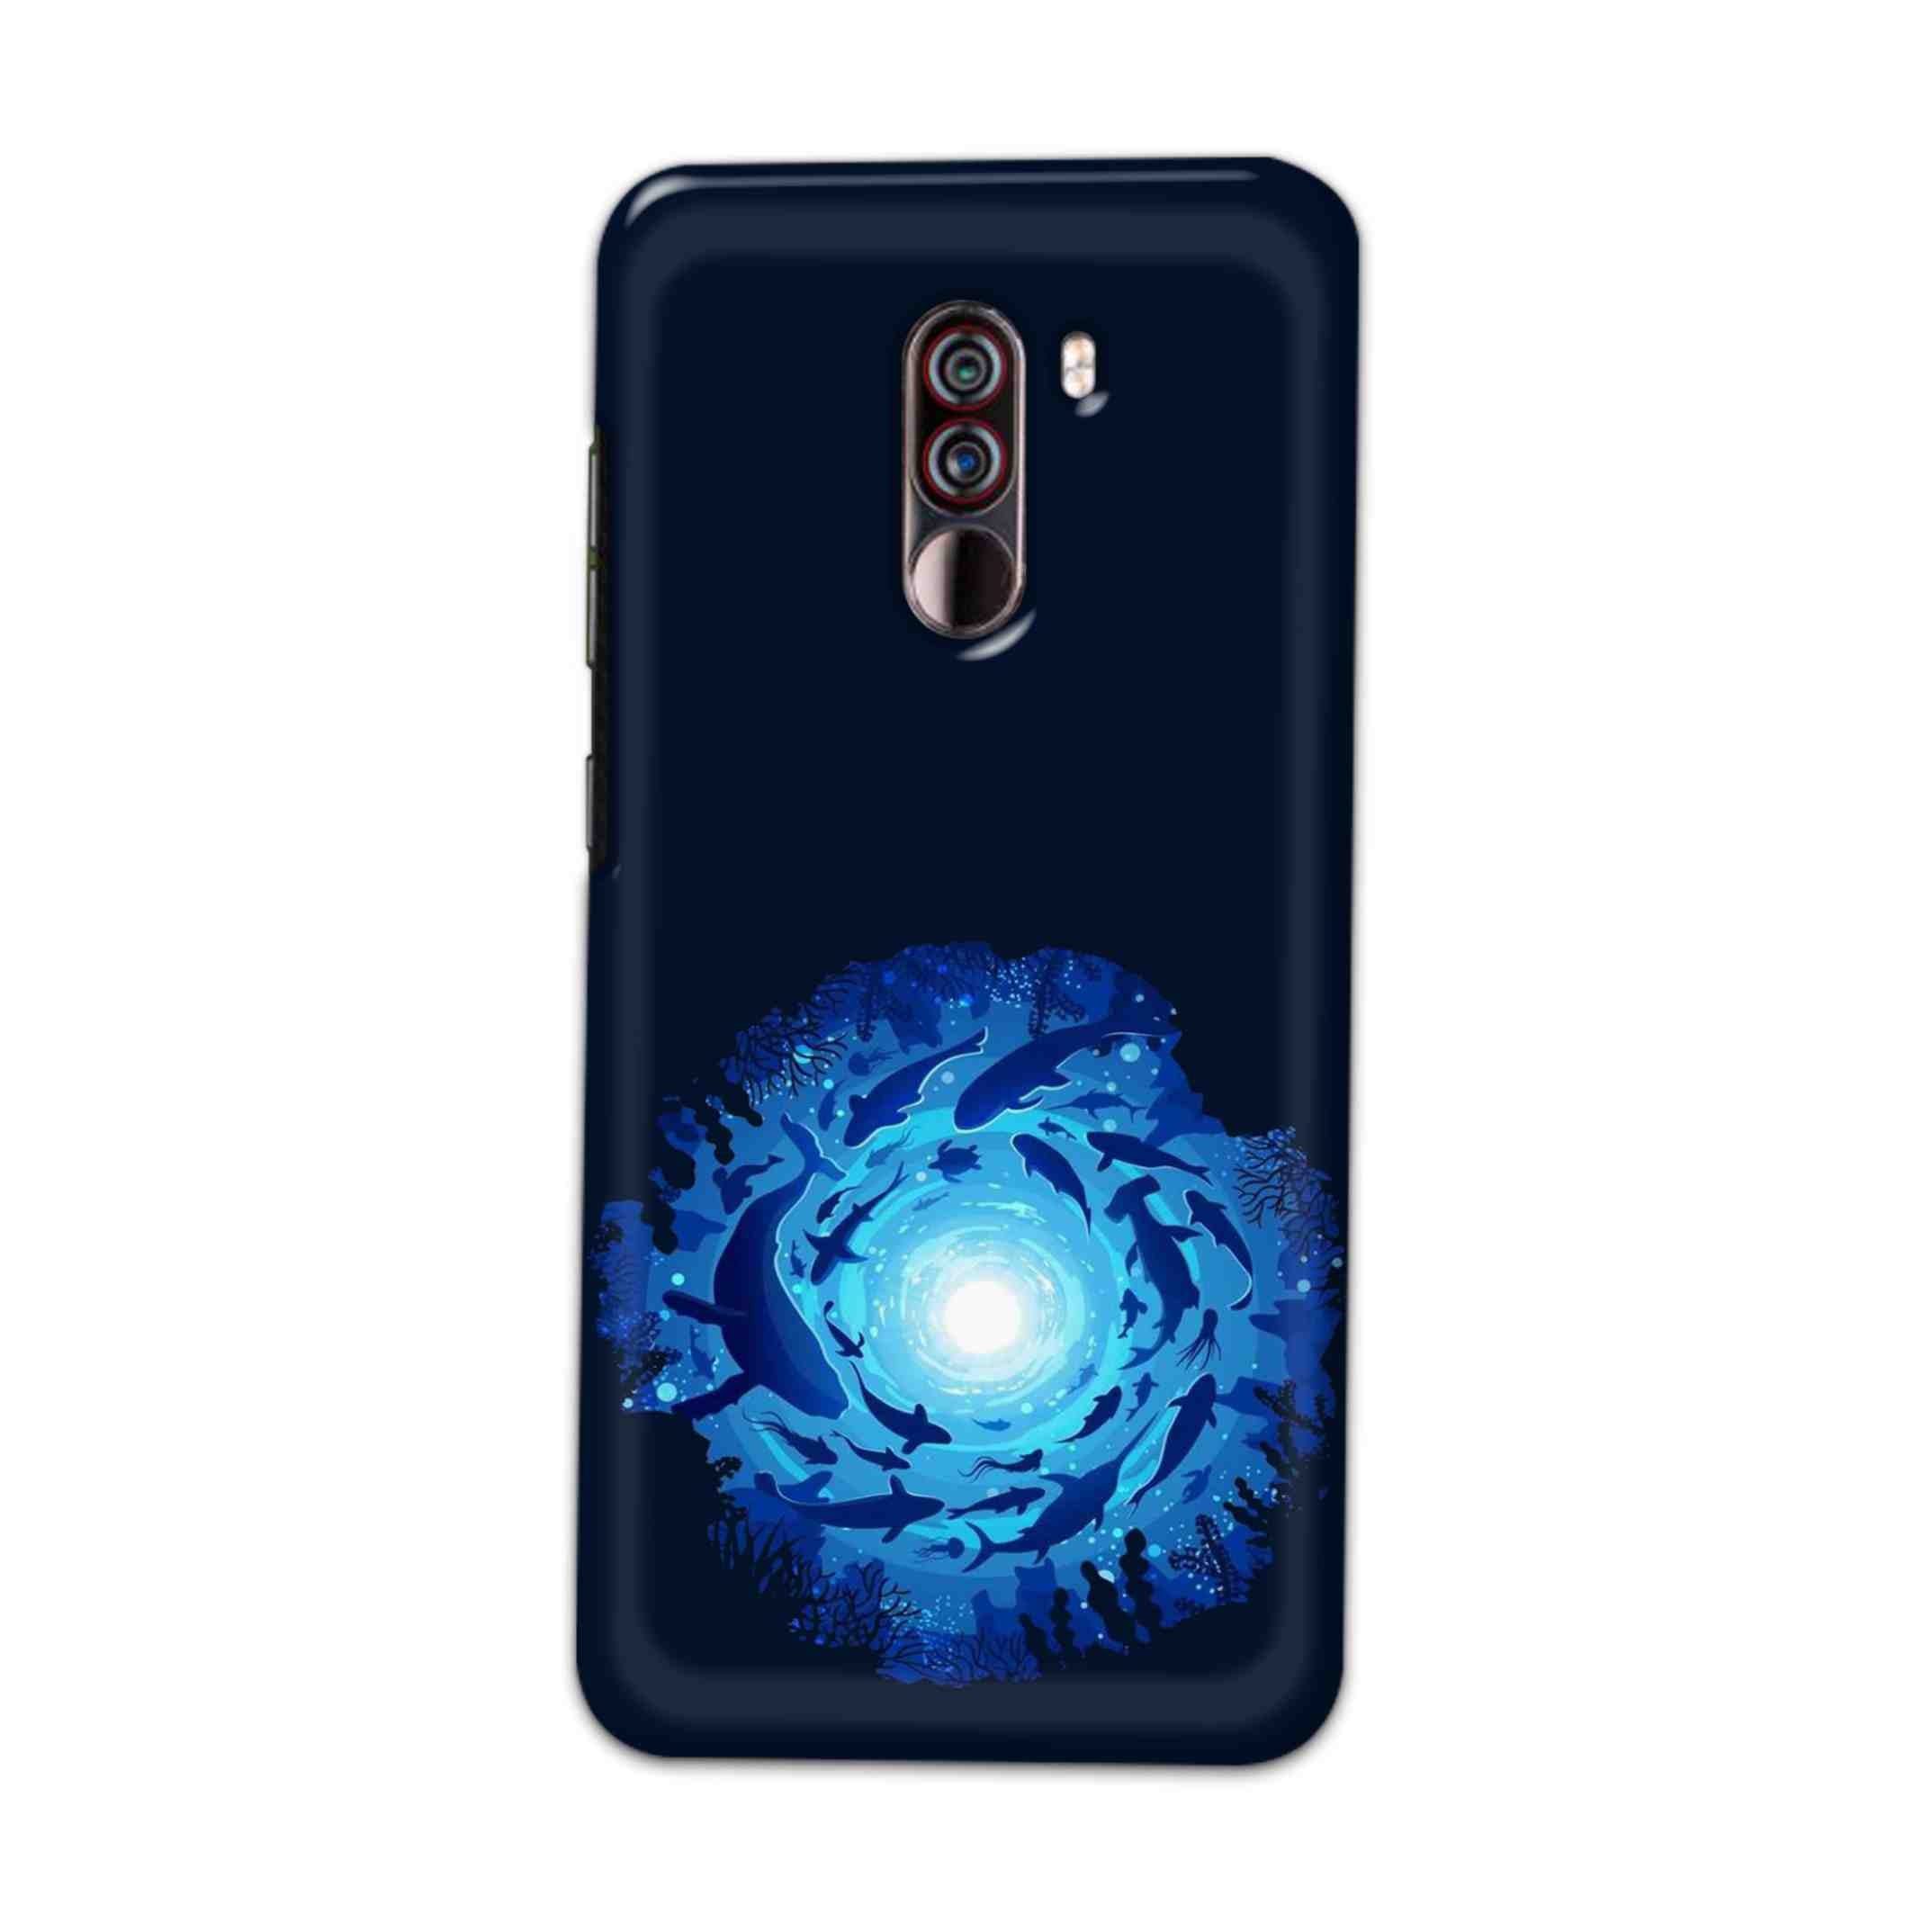 Buy Blue Whale Hard Back Mobile Phone Case Cover For Xiaomi Pocophone F1 Online